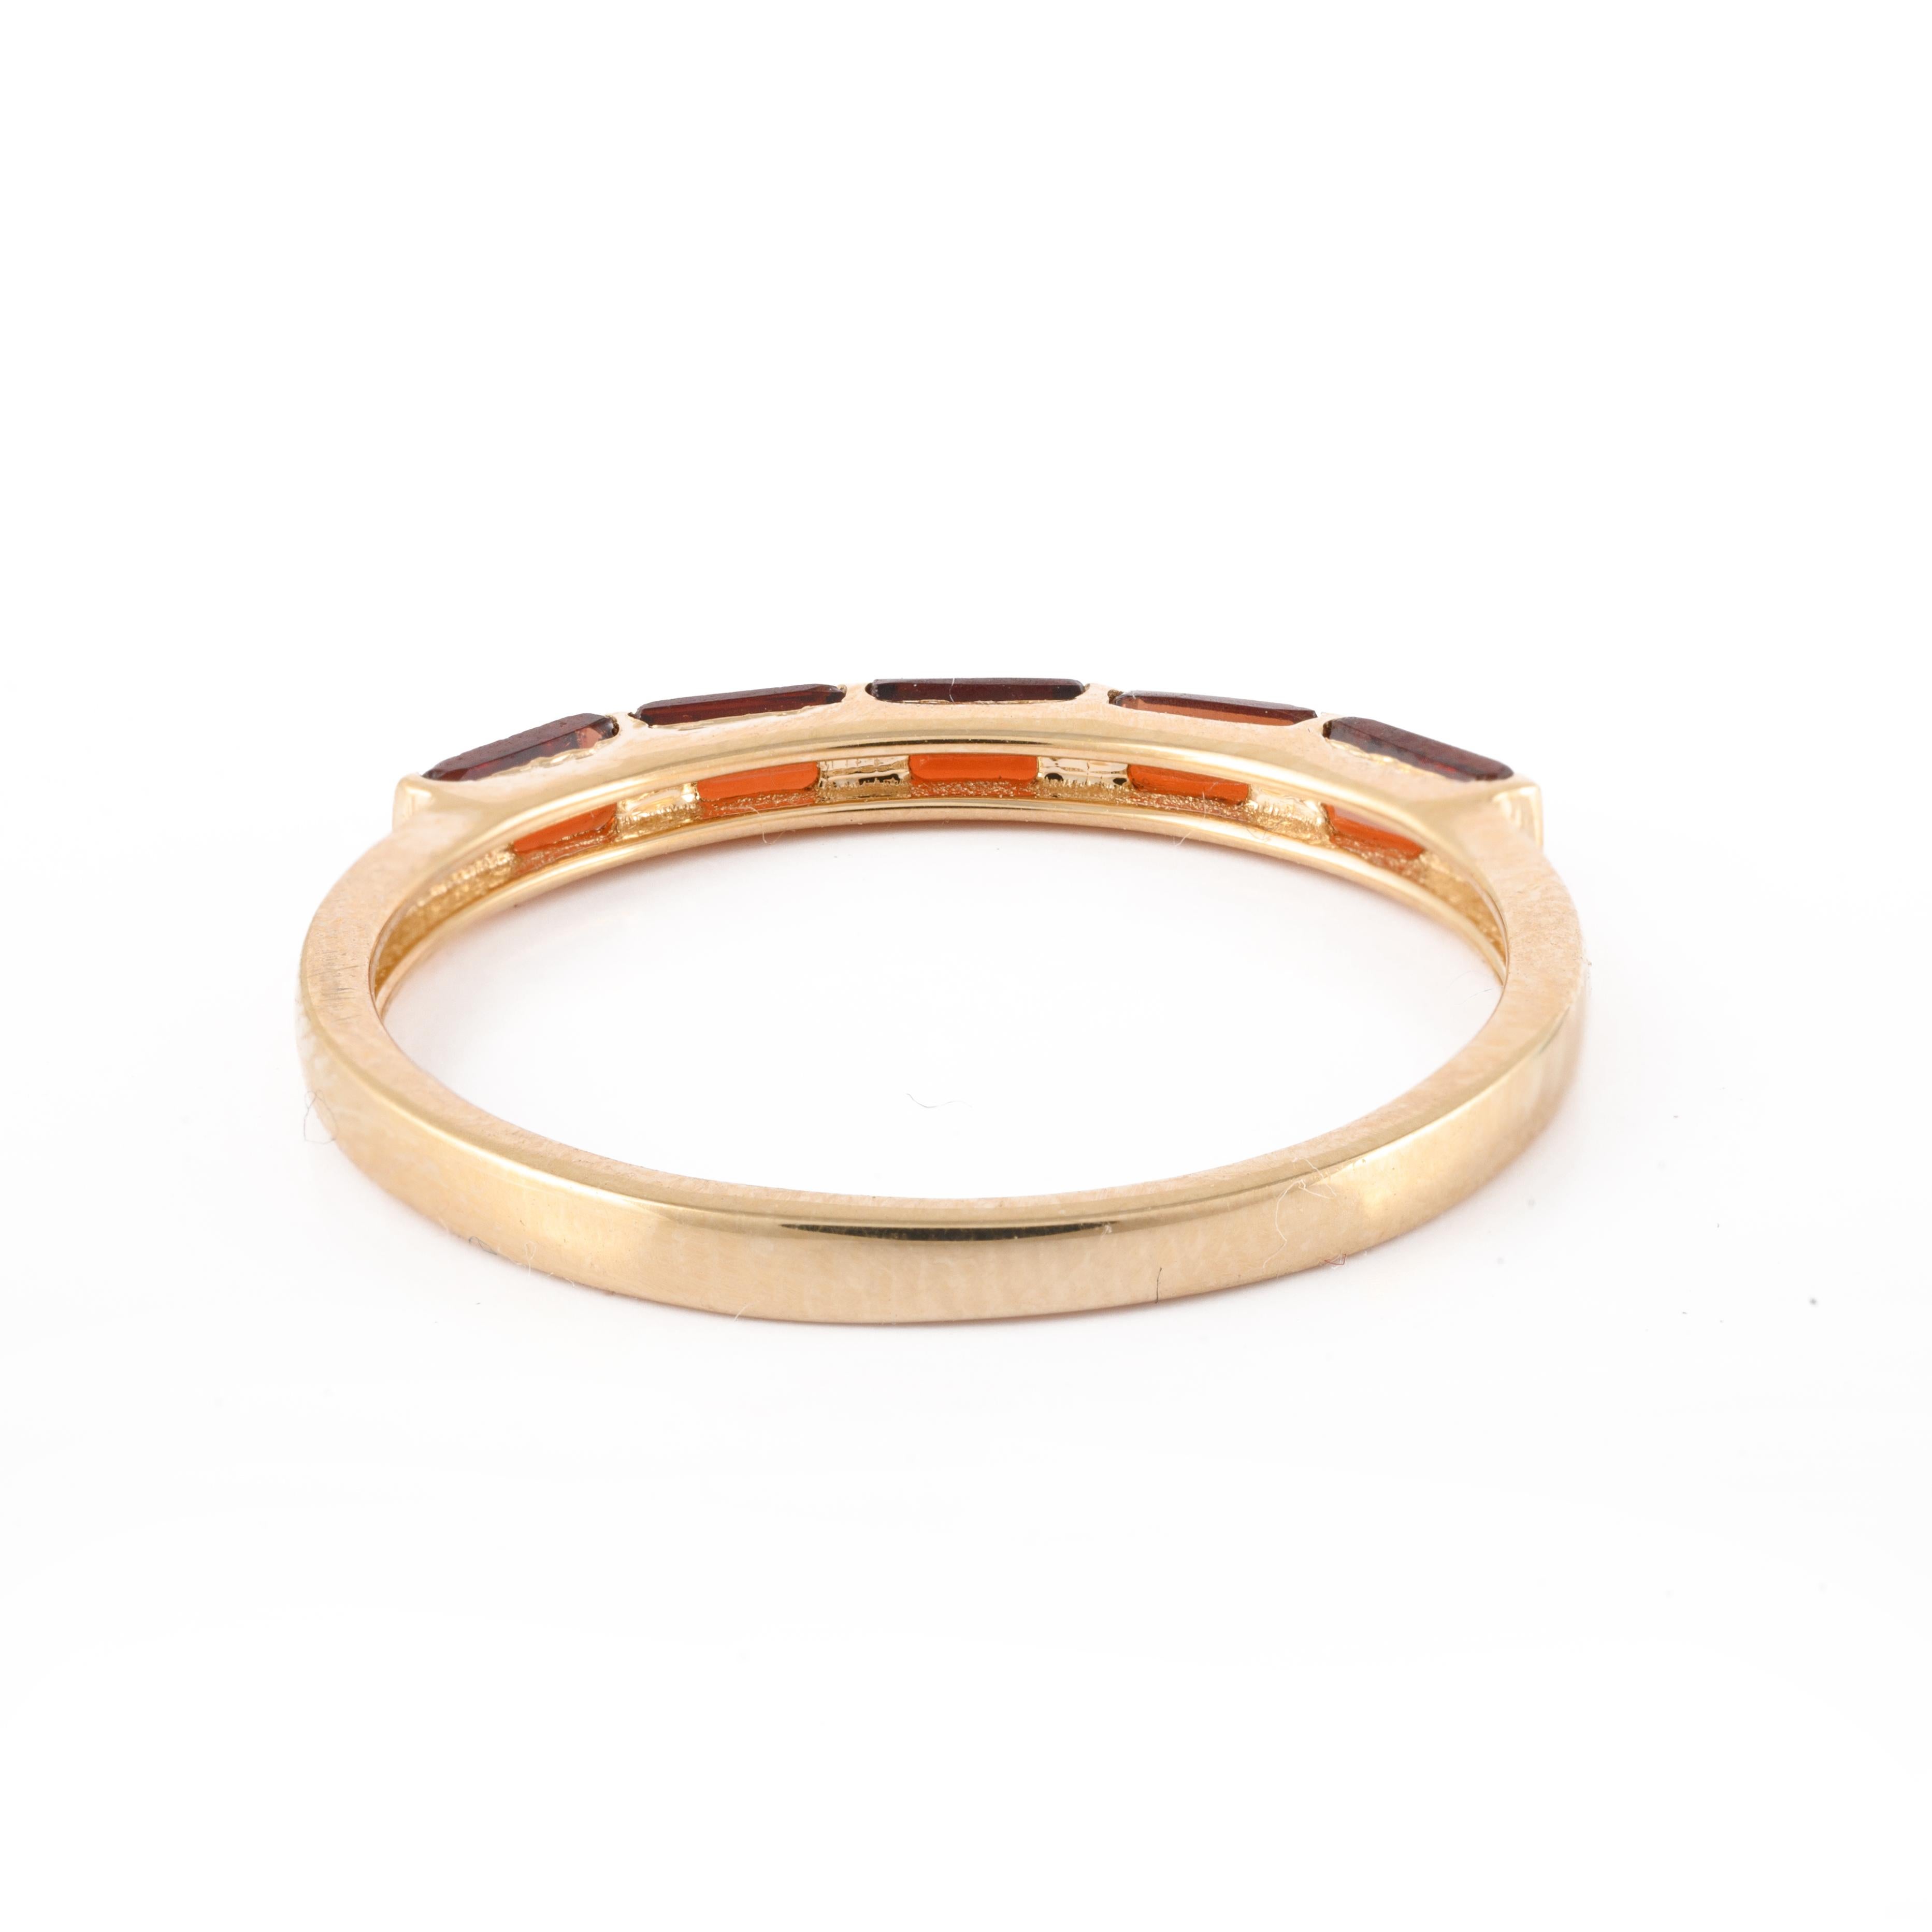 For Sale:  Natural Garnet Half Stackable Band Ring 14 Karat Solid Yellow Gold For Her 4